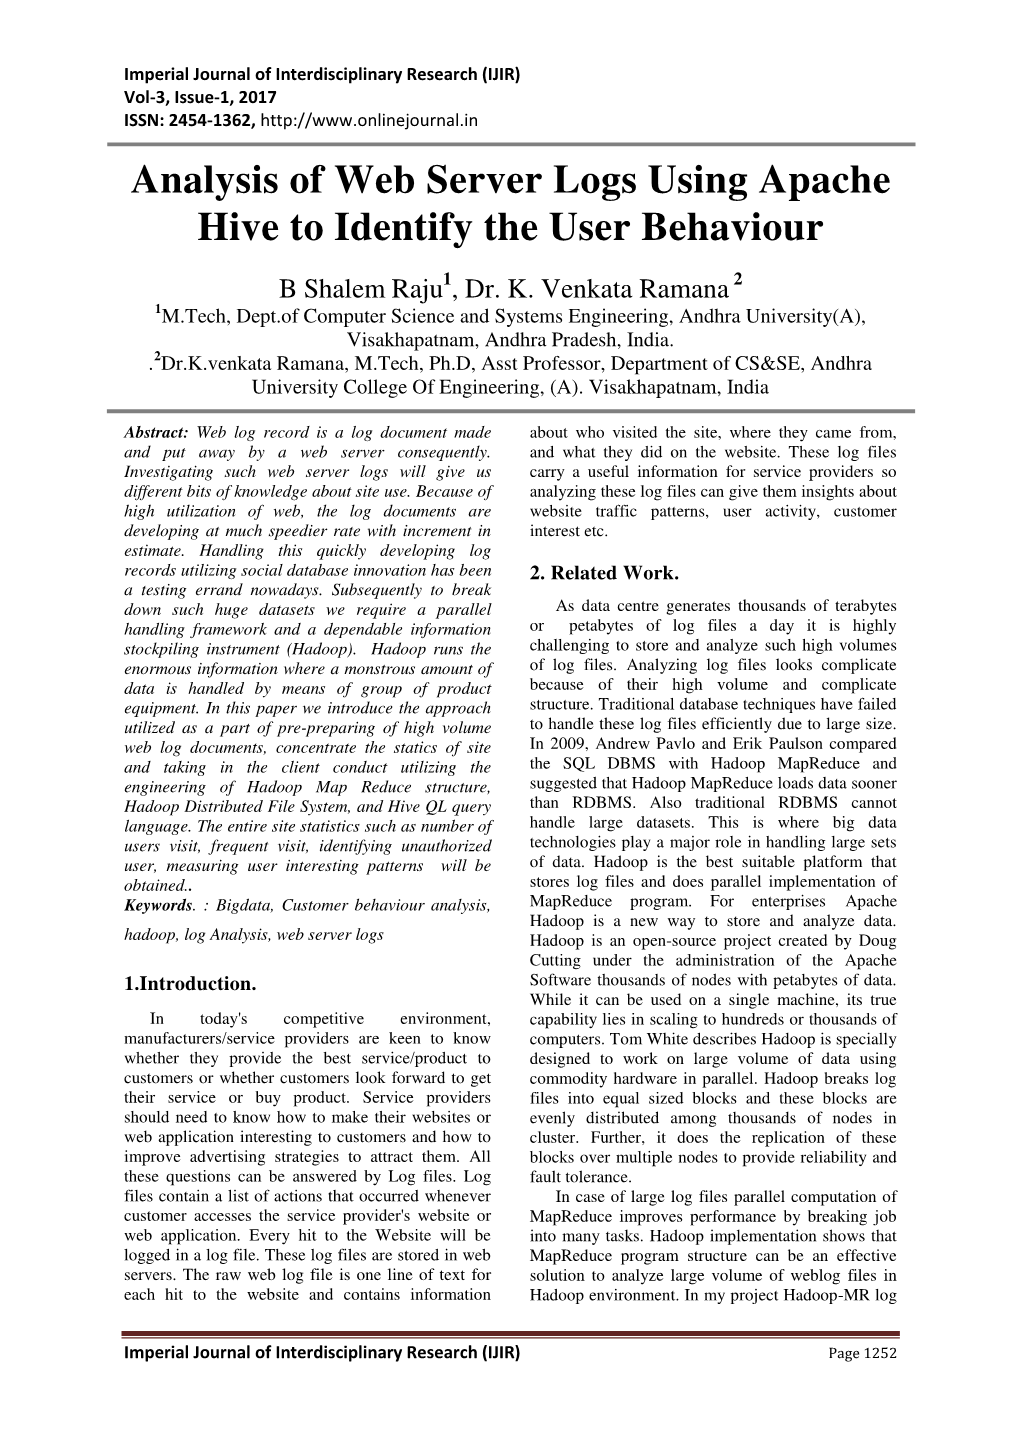 Analysis of Web Server Logs Using Apache Hive to Identify the User Behaviour